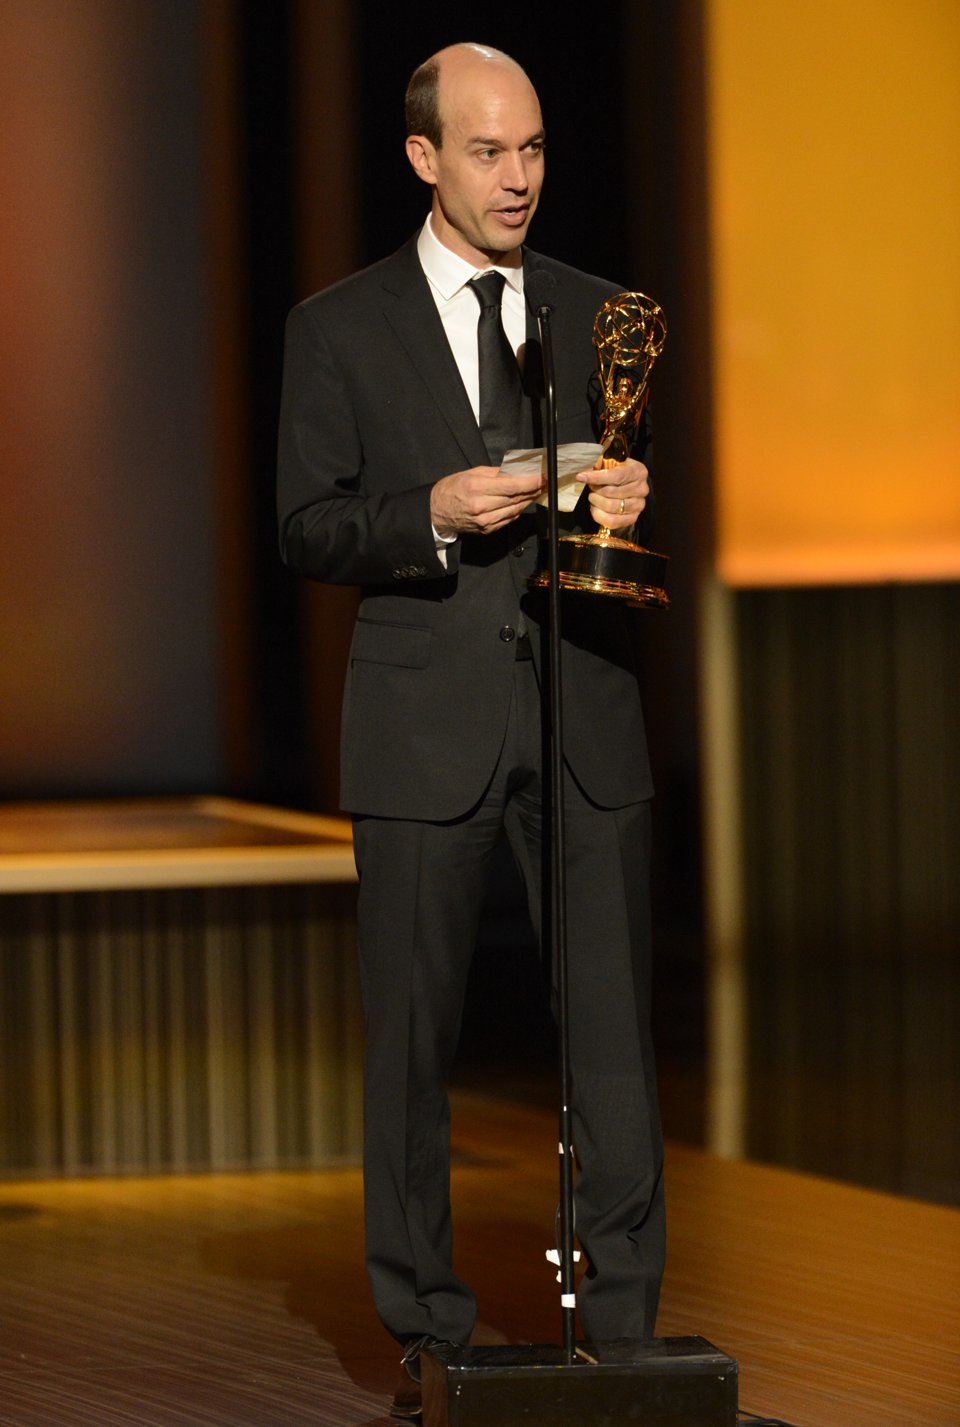 Andy Bialk accepts the award for Outstanding Individual Achievements in Animation for Dragons: Riders of Berk onstage at the 2013 Primetime Creative Arts Emmy Awards, on Sunday, September 15, 2013 at Nokia Theatre L.A. Live, in Los Angeles, Calif.